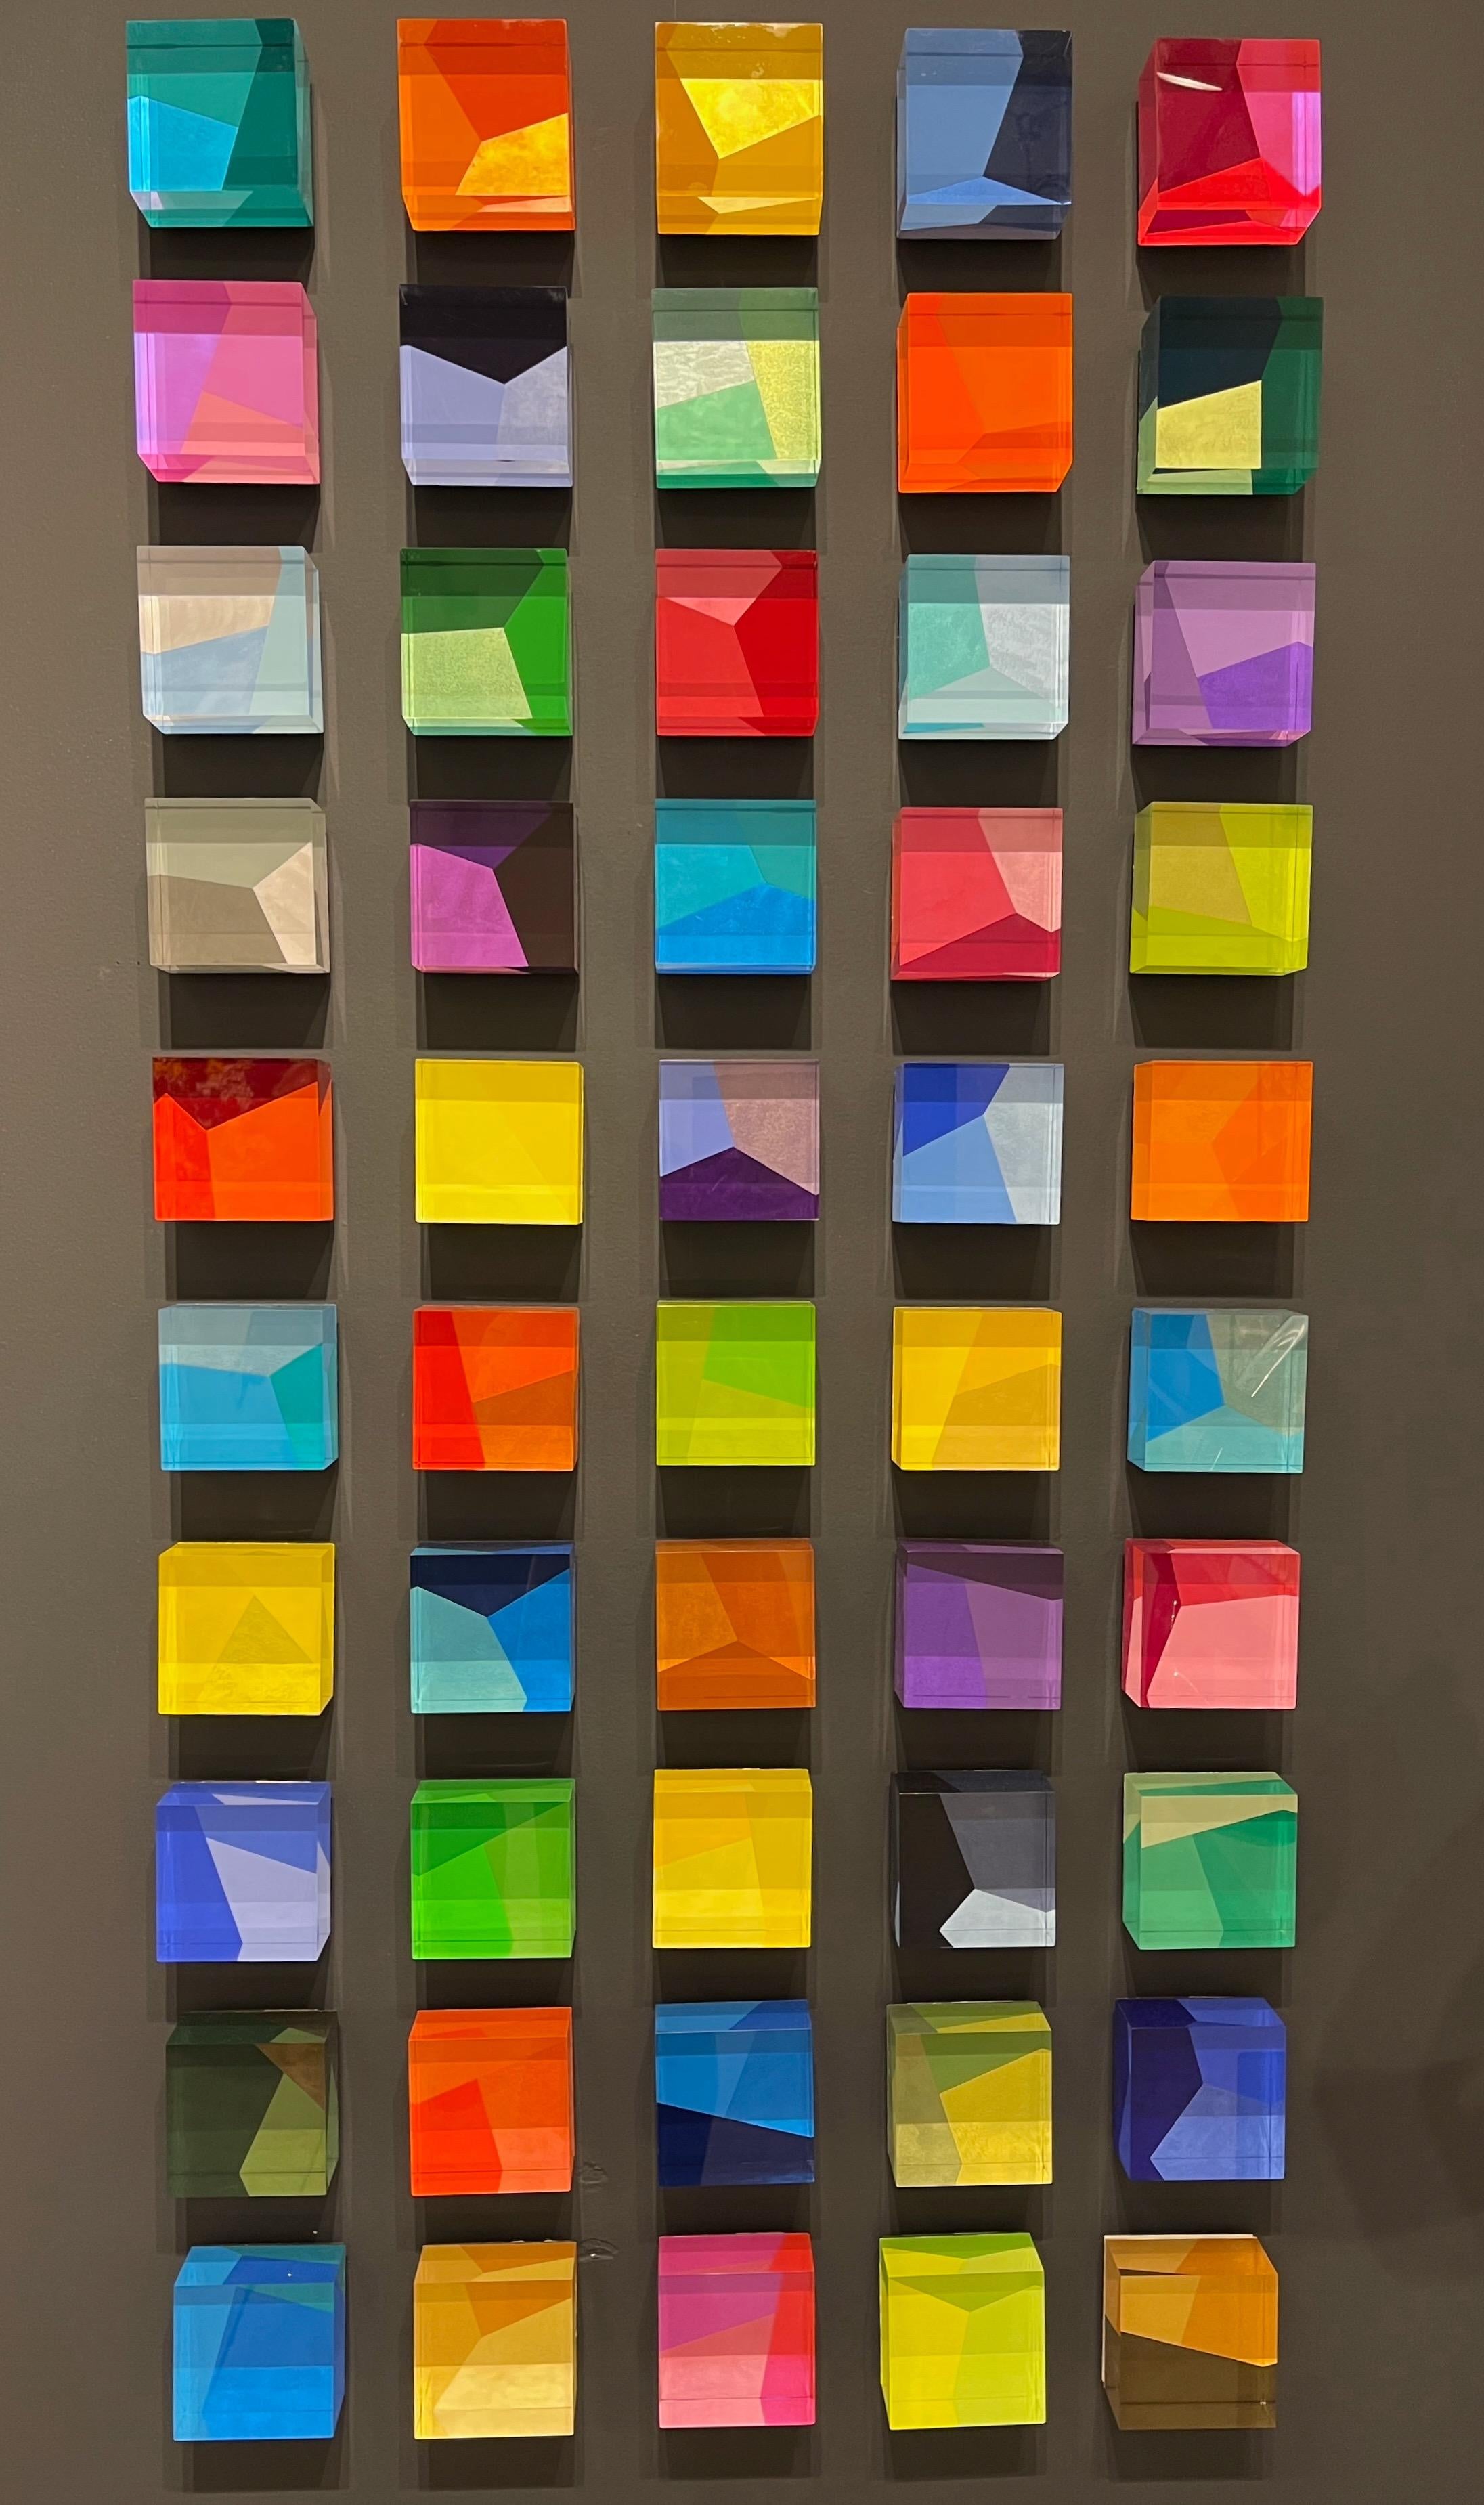 The cubes are solid acrylic which have been painted in reverse on the back of each cube, they have hardware installed on the back so that they can be easily hung on the wall. The cubes are 2 inches thick, and are 4 X 4 inches square.